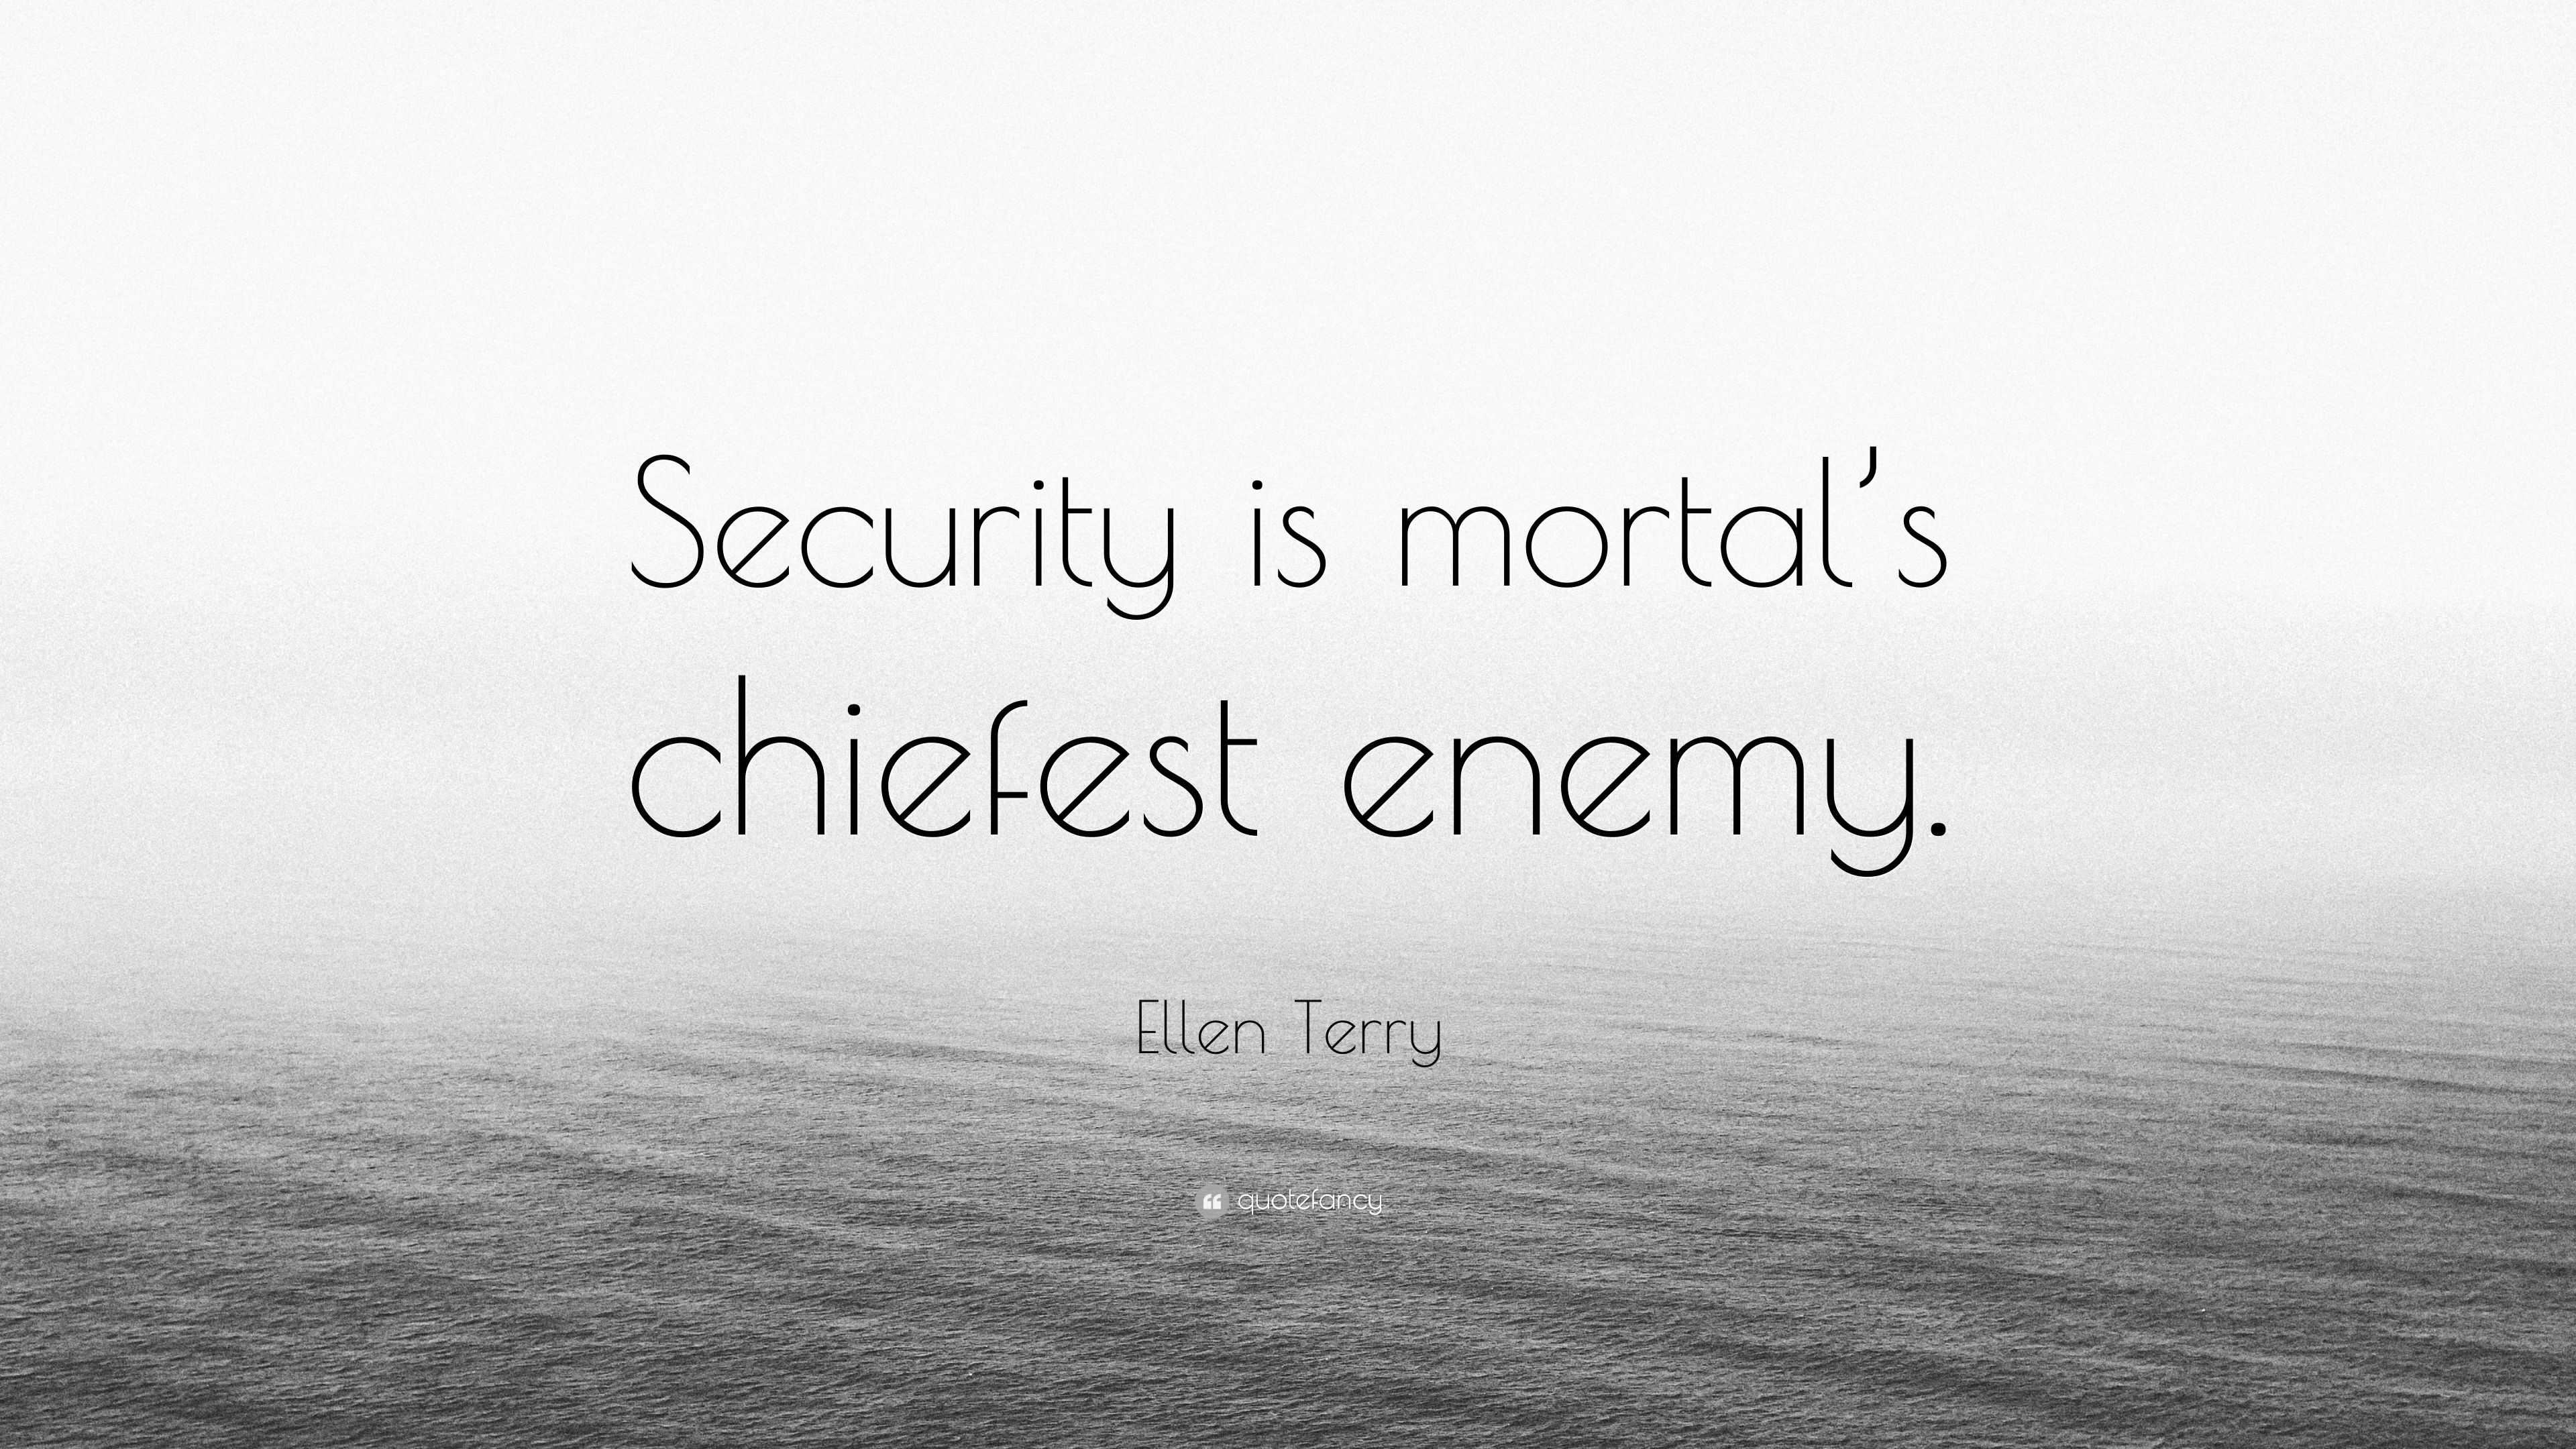 security is mortals chiefest enemy